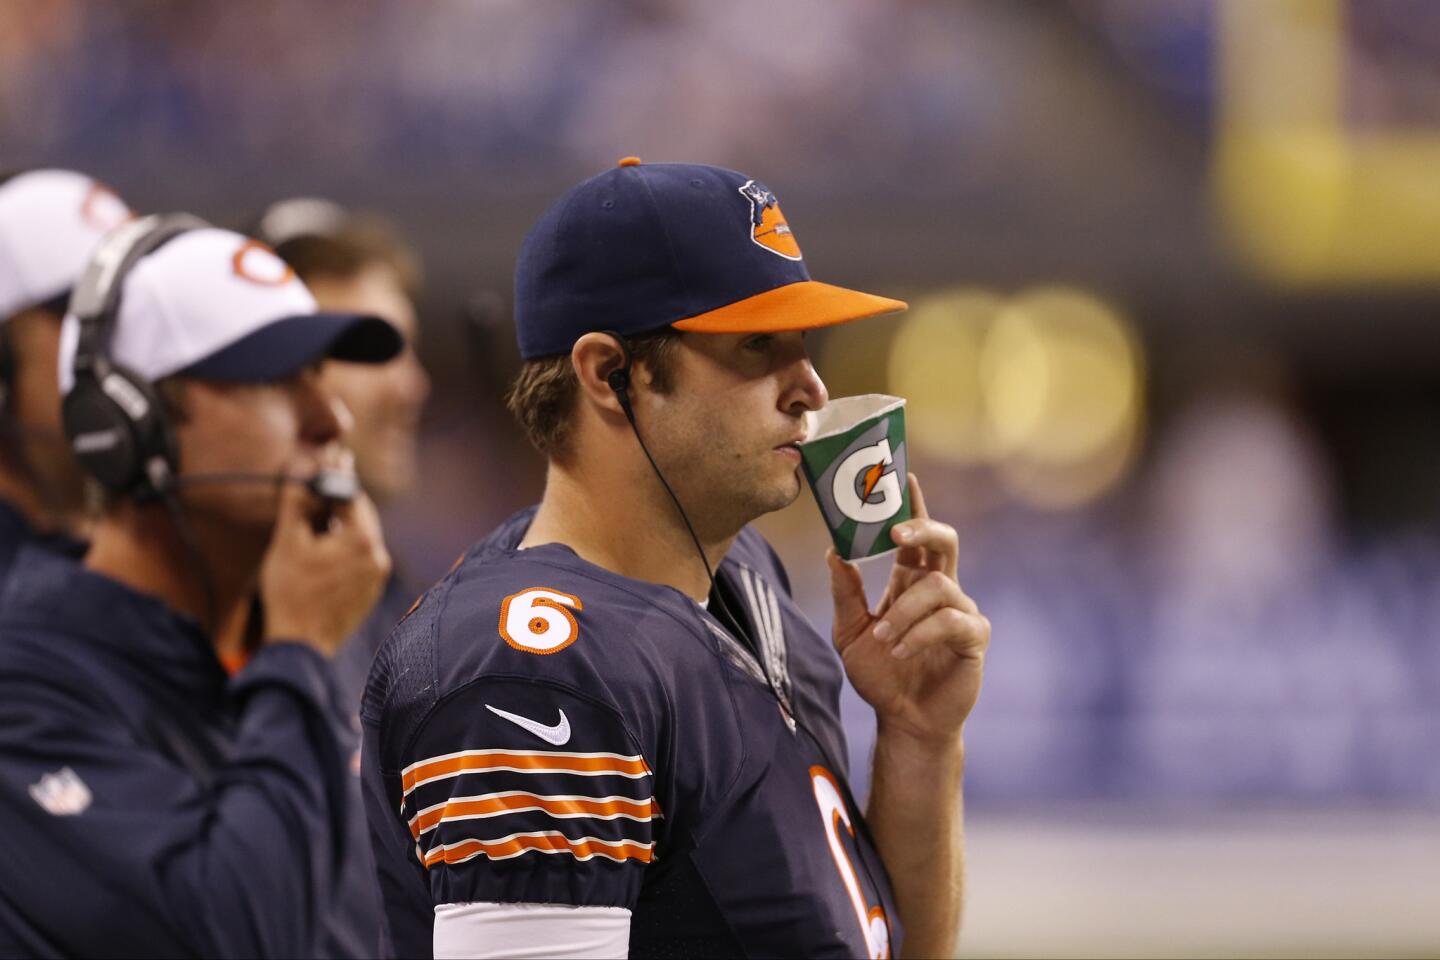 Bears quarterback Jay Cutler on the bench in the second half of a preseason game against the Colts.